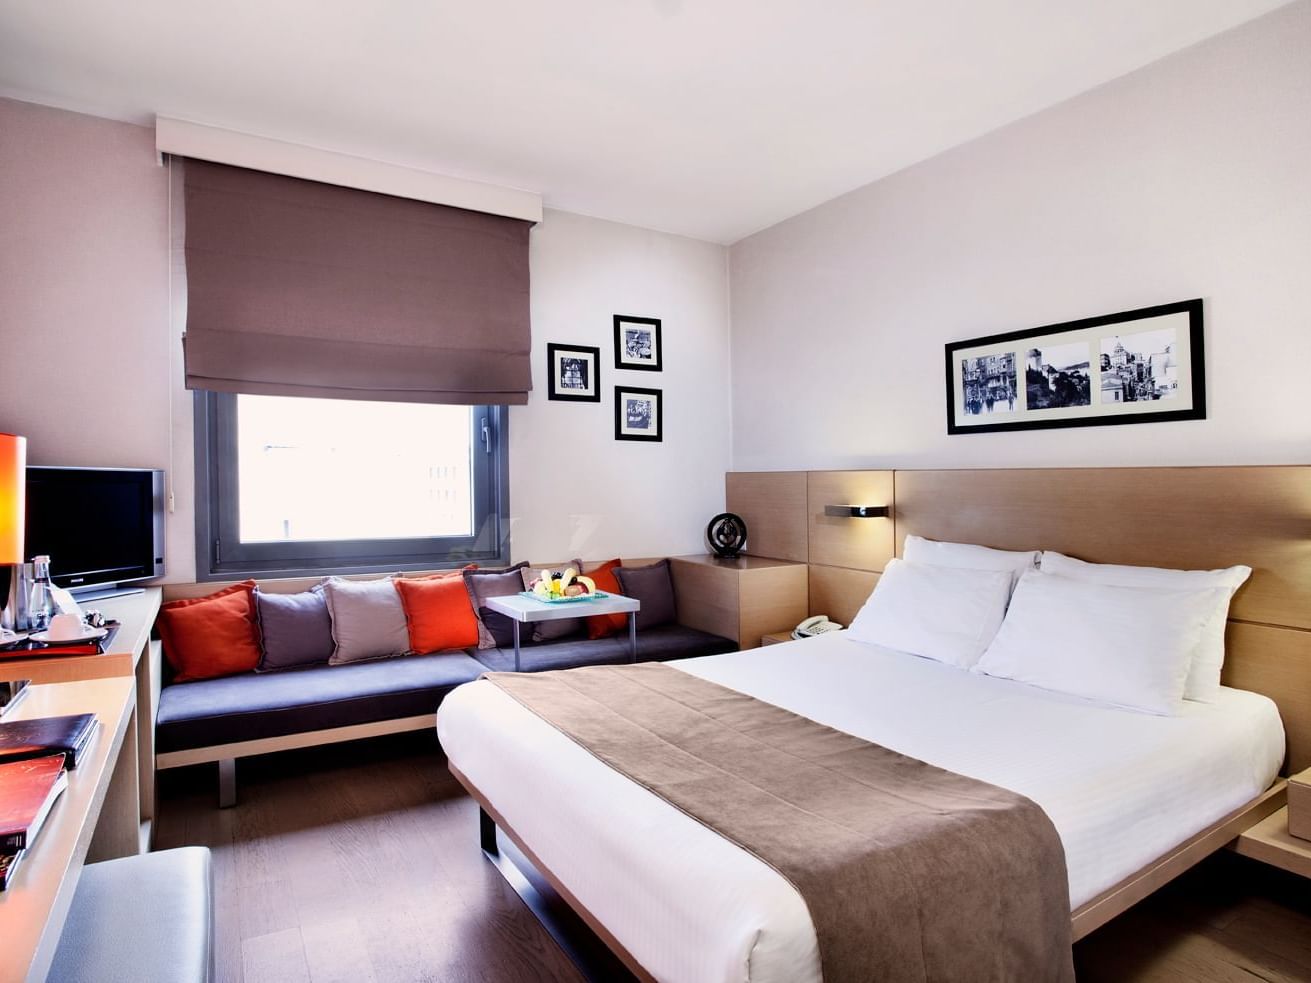 Bed room with a large window at Eresin taxim premier.